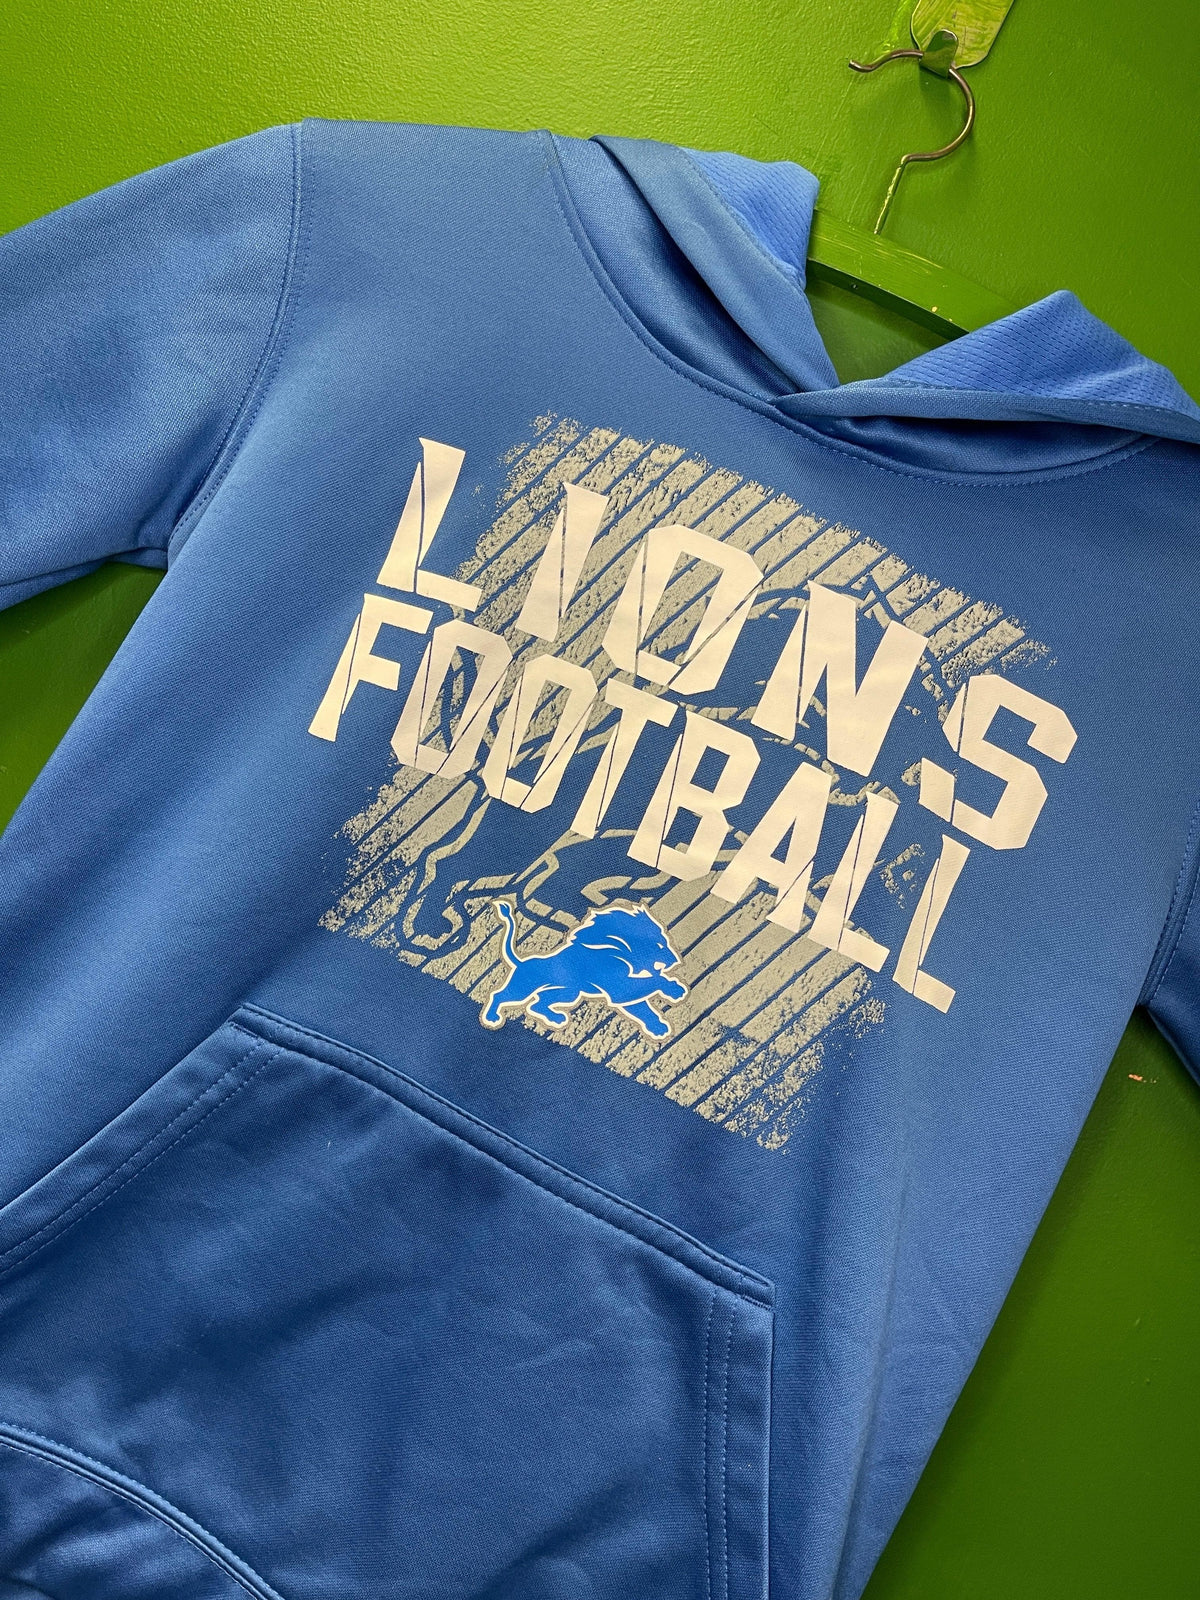 NFL Detroit Lions Graphic Hoodie Sweatshirt Youth Small 8